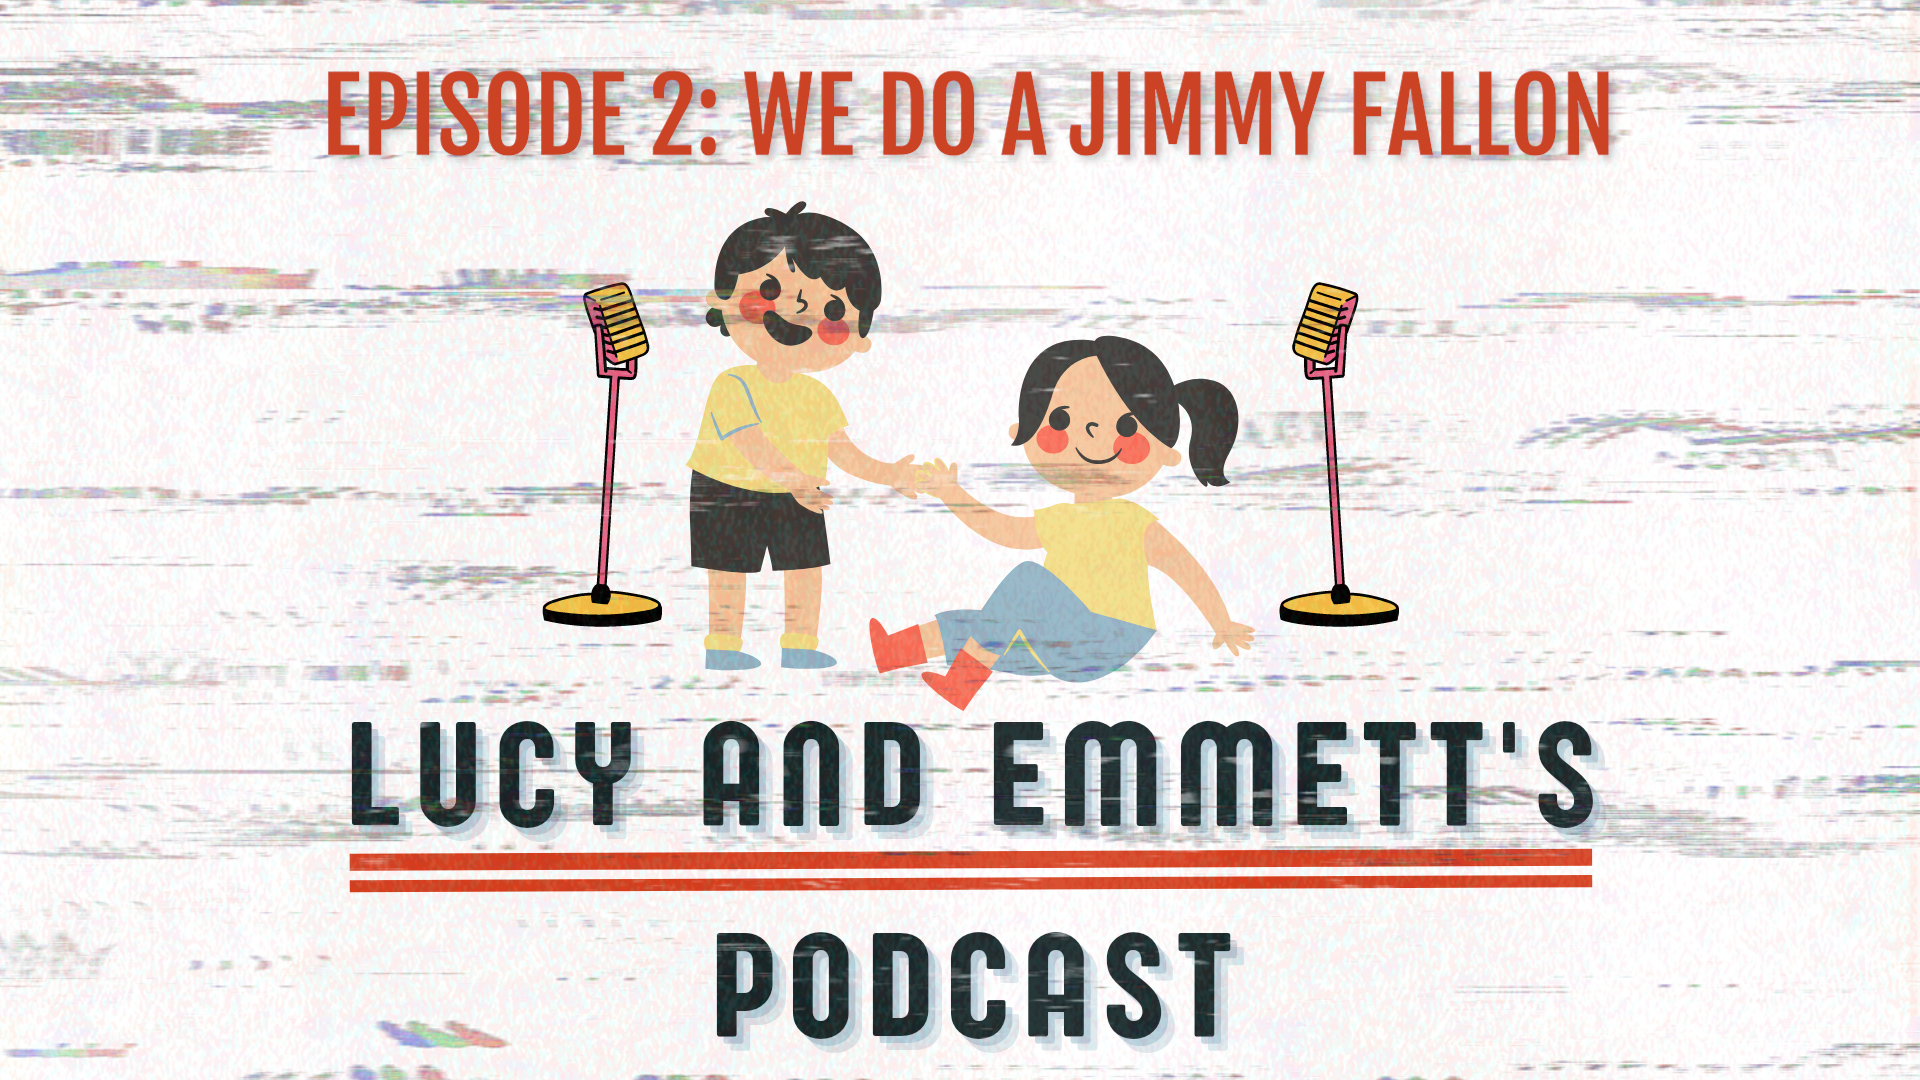 Lucy and Emmetts Podcast Episode 2 Cover